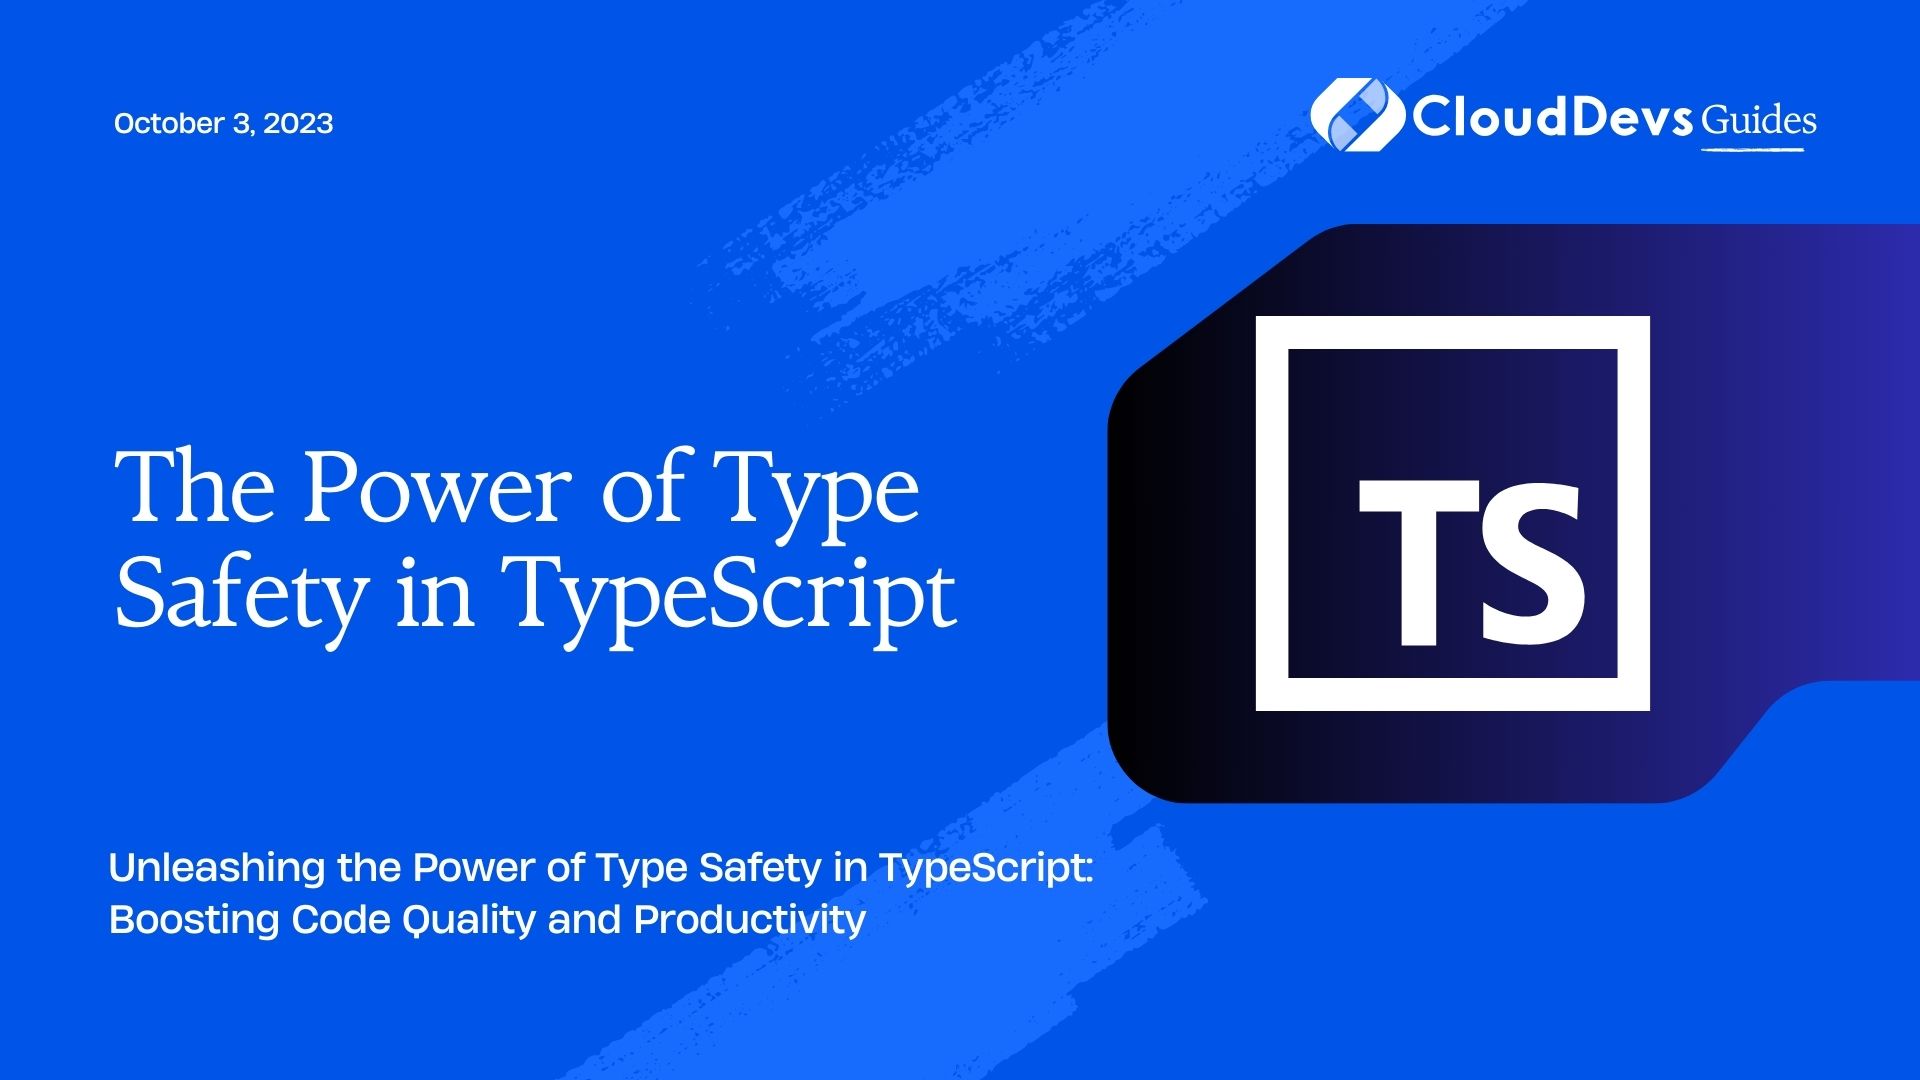 The Power of Type Safety in TypeScript